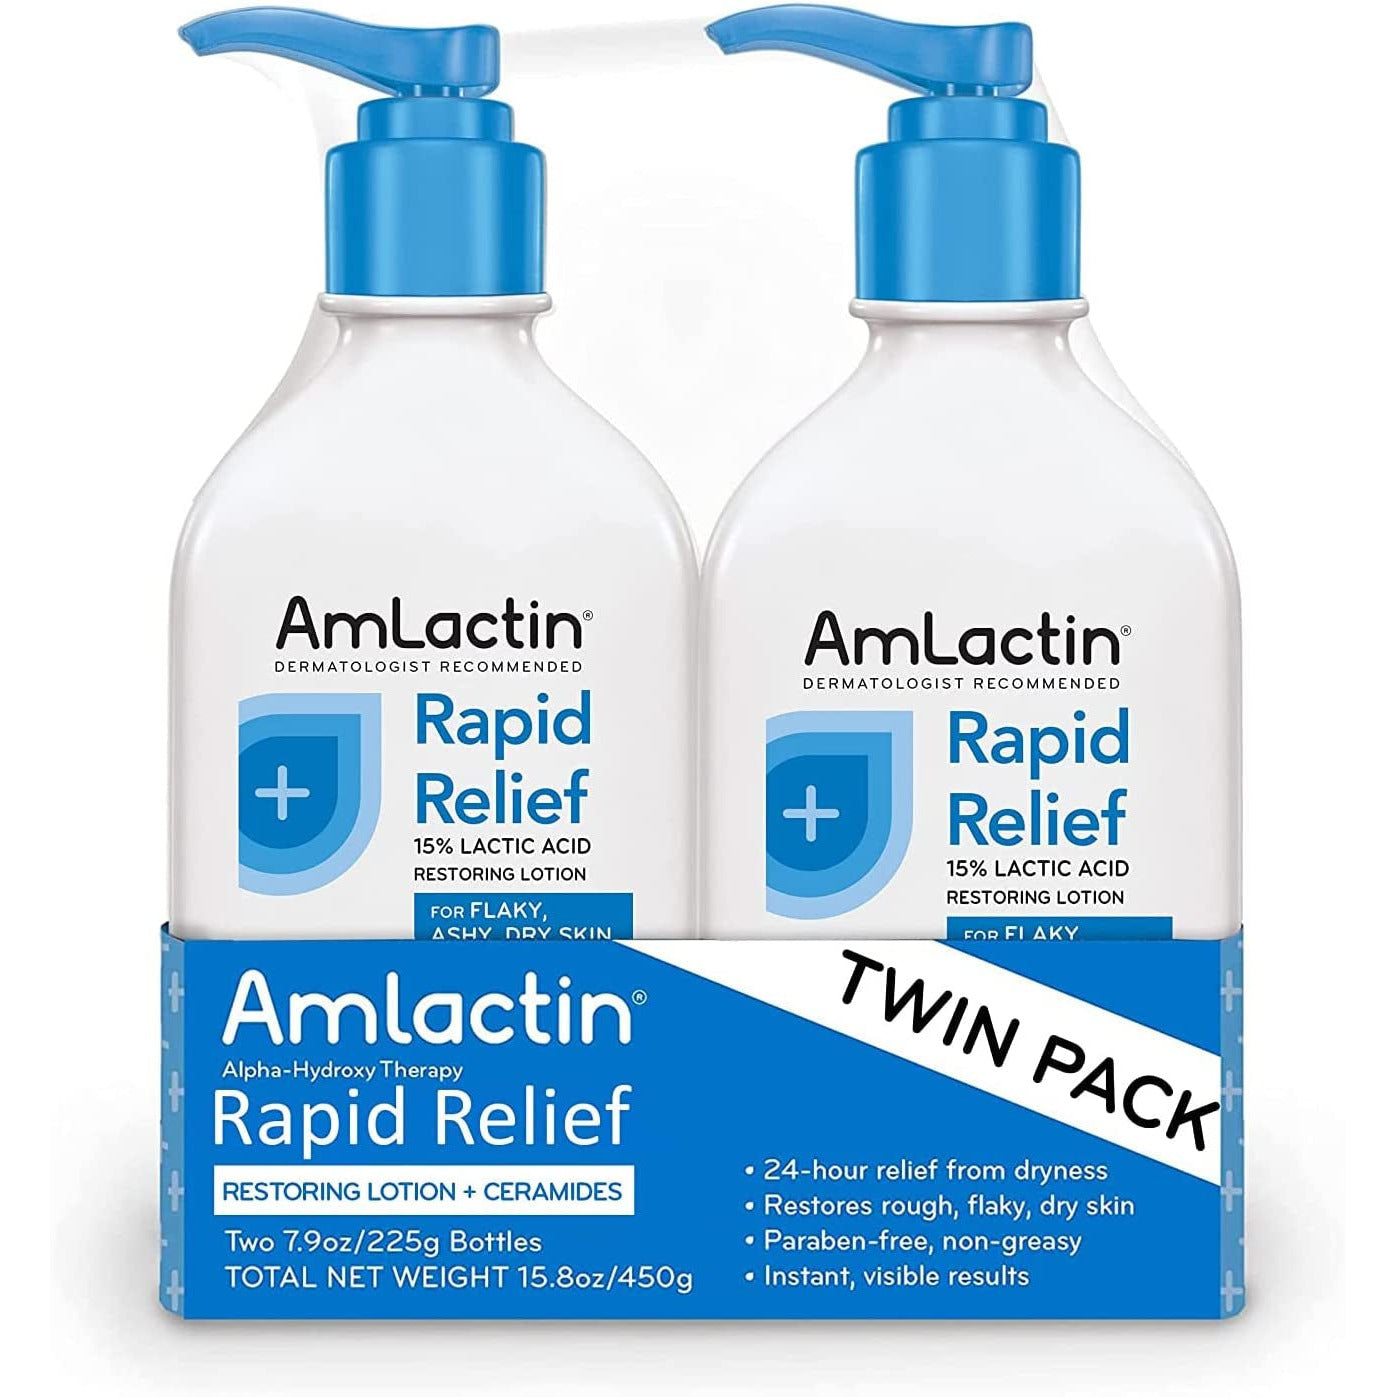 Amlactin Rapid Relief Restoring Lotion + Ceramides Twin Pack, (2) 7.9 Ounce Bottles, Paraben Free